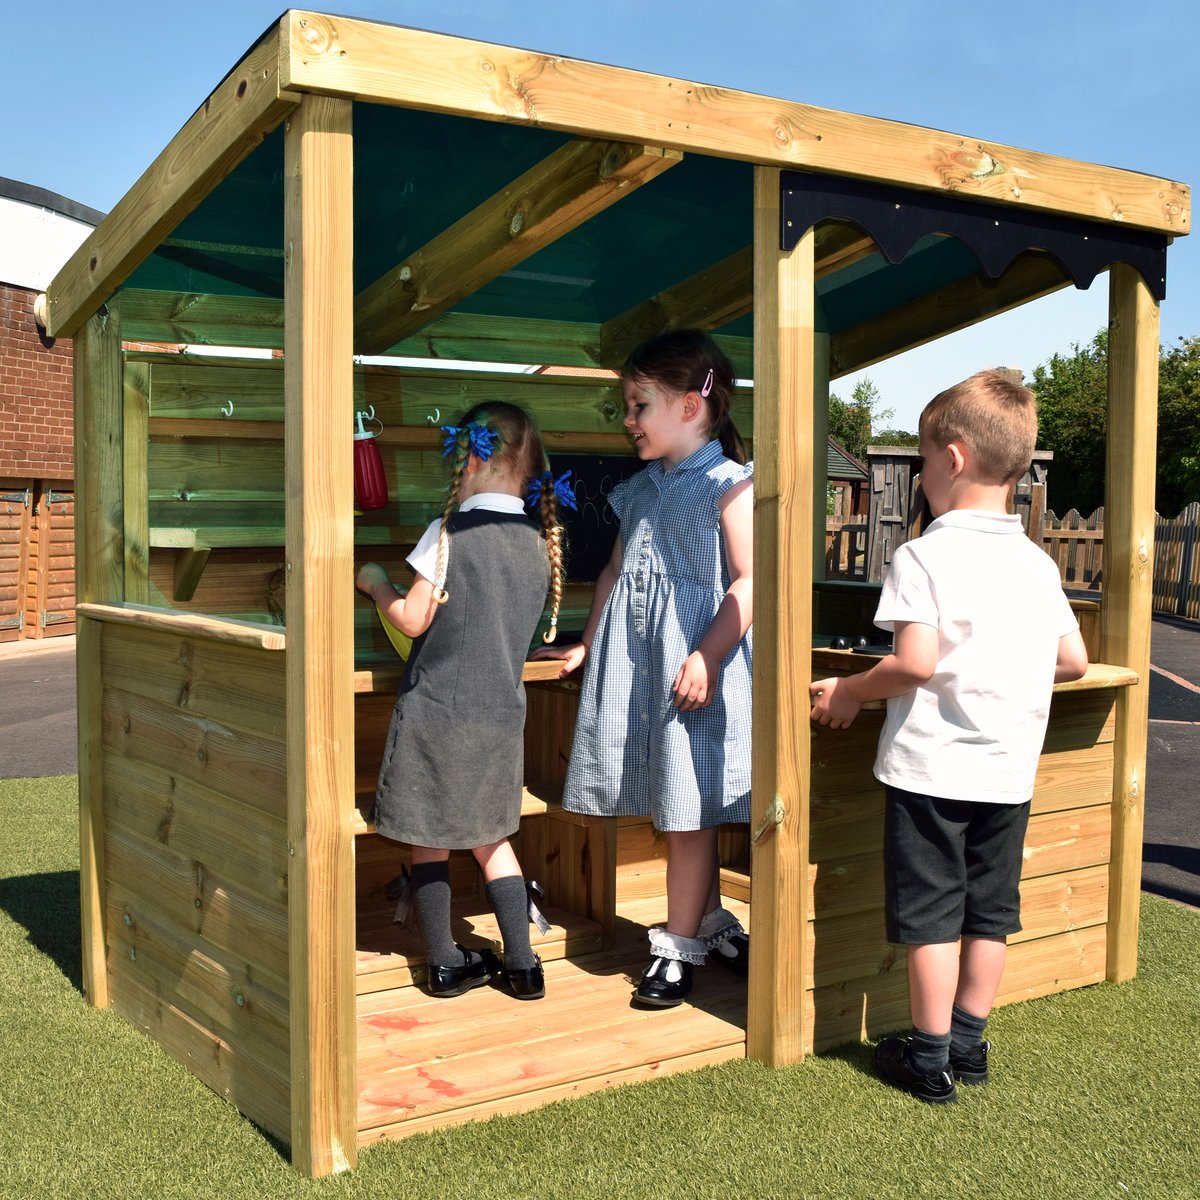 Cooking Station🍳 Featuring a kitchen space to cook up creations & a shop front to serve; this multi-functional structure will provide hours of entertainment for early years education! 🌳 Buy online 👉 t.ly/N4h1l #togetherbetter #mudkitchens